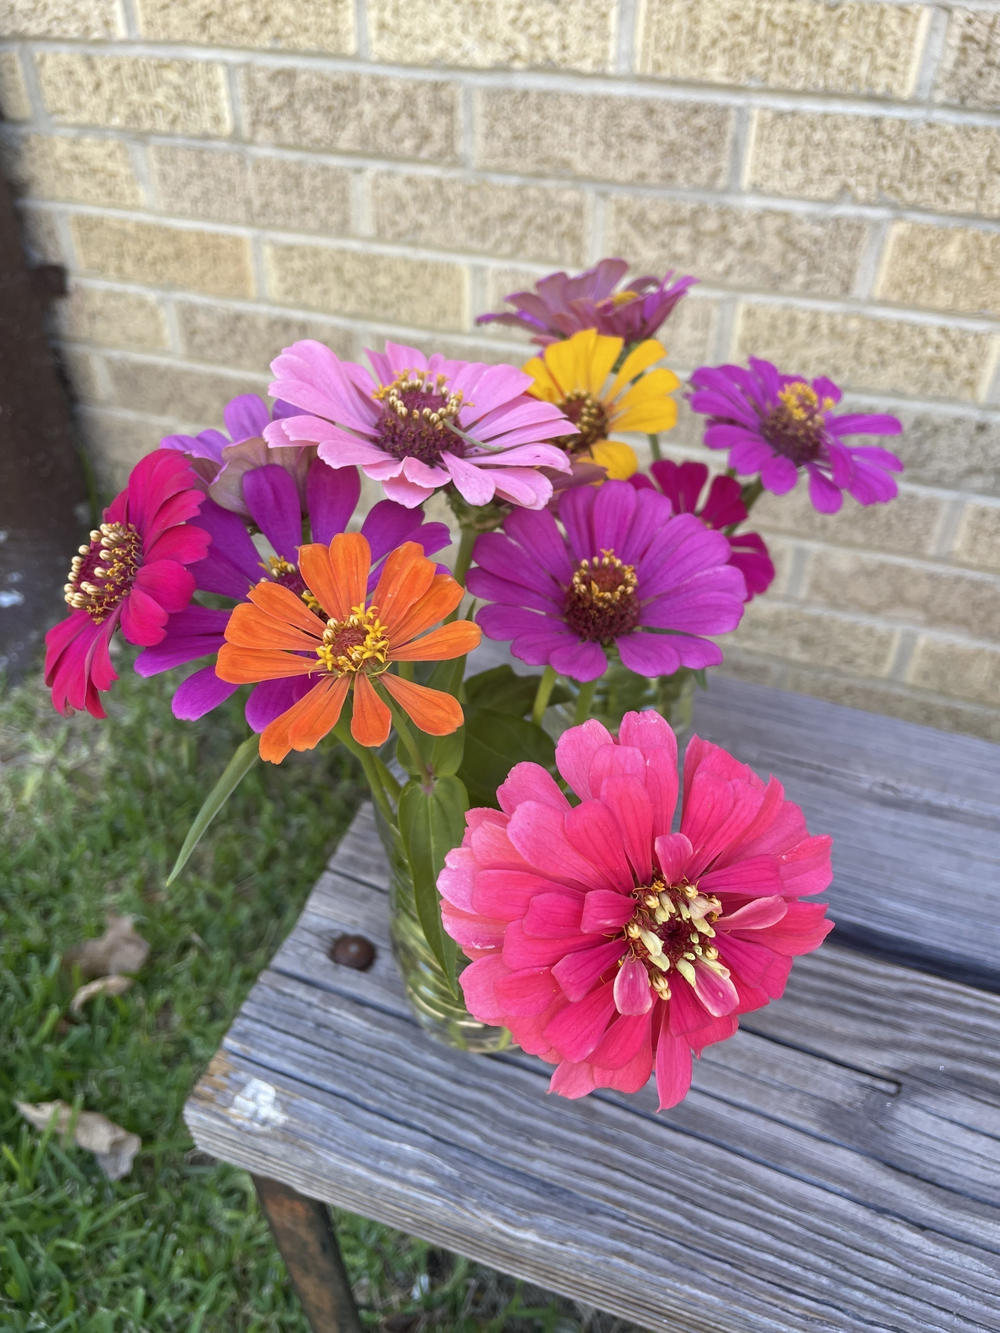 On Monday, as workers at Hope Medical Group for Women in Shreveport called back patients, a neighbor came by to drop off flowers from his garden, saying he knew it was a 